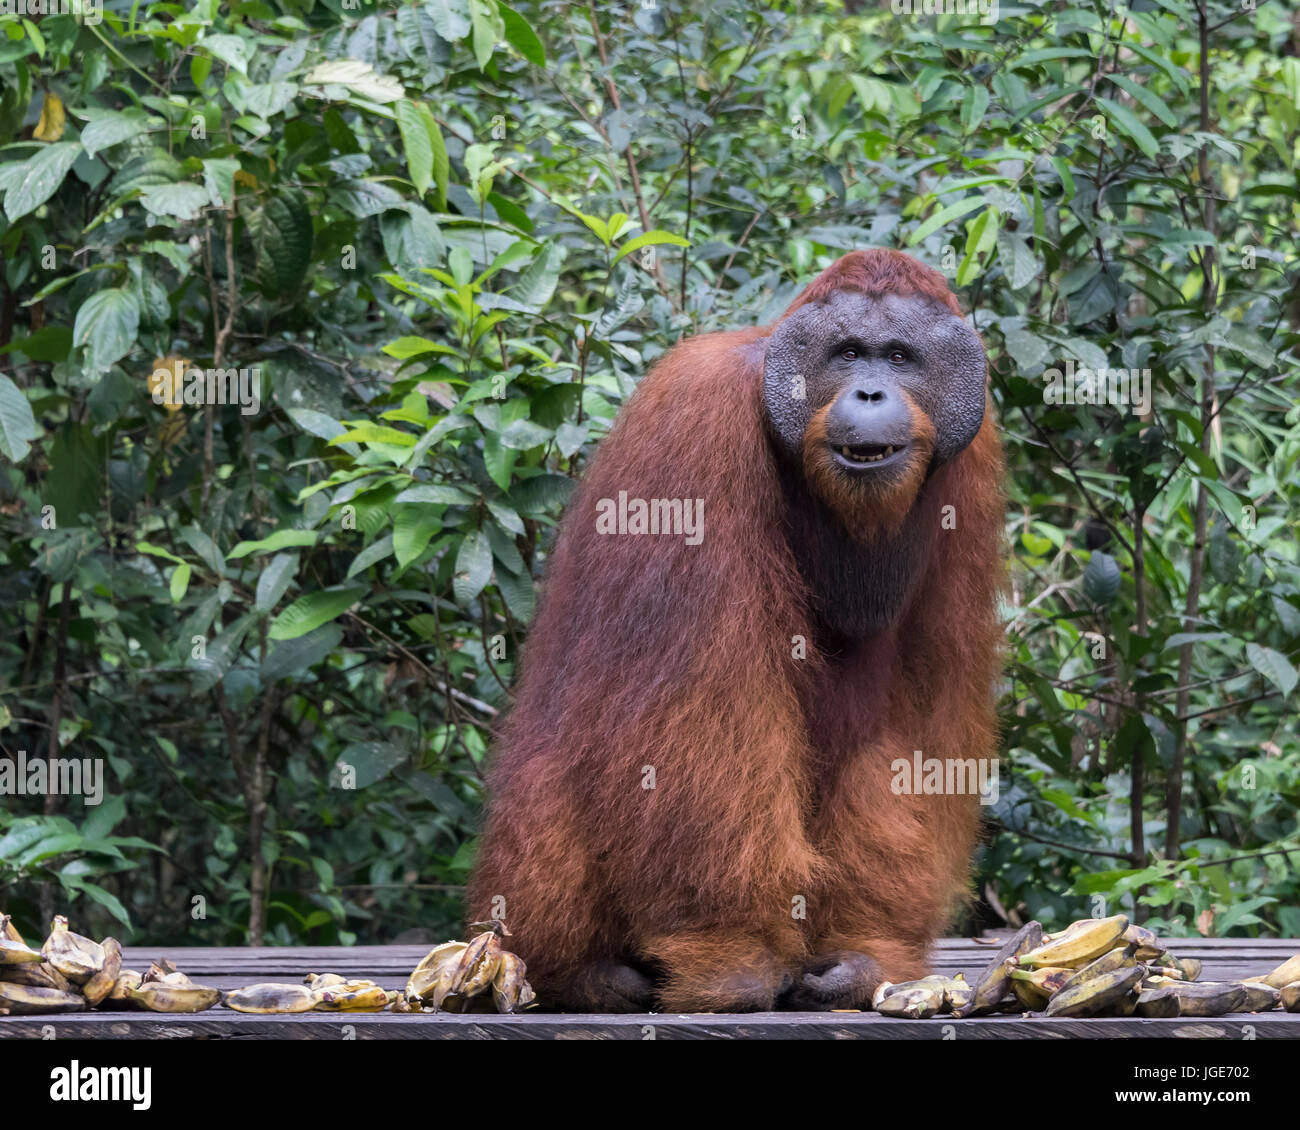 Flanged orangutan with a nice smile sitting for his portrait, Tanjung Puting National Park, Kalimantan, Indonesia Stock Photo